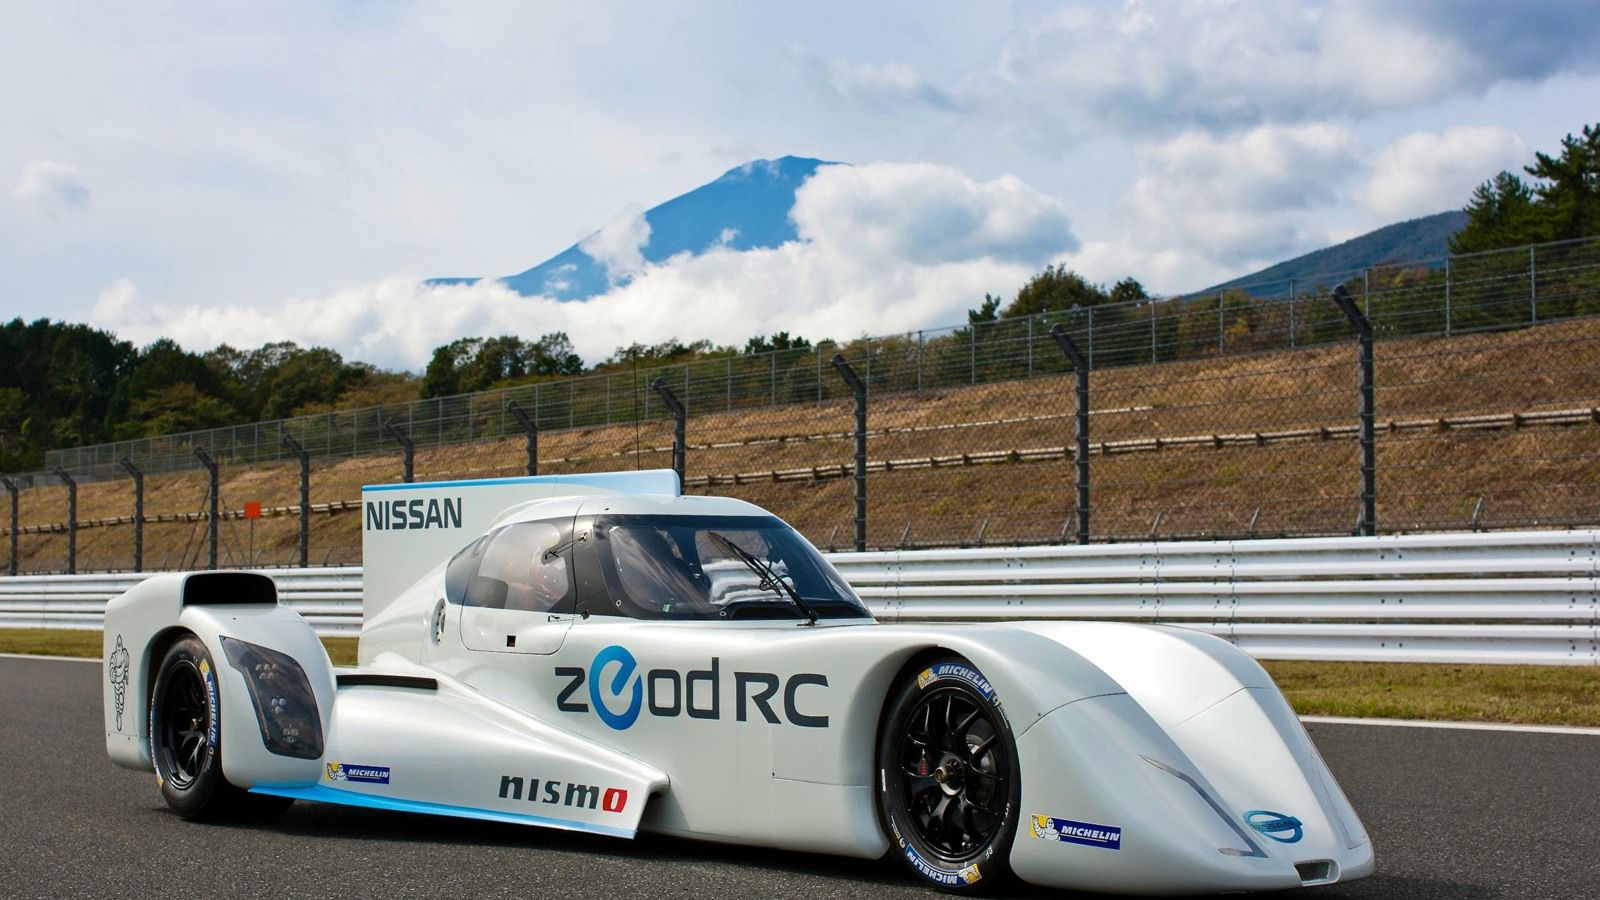 The ZEOD RC is the first car to do a complete lap of Le Mans on electric power